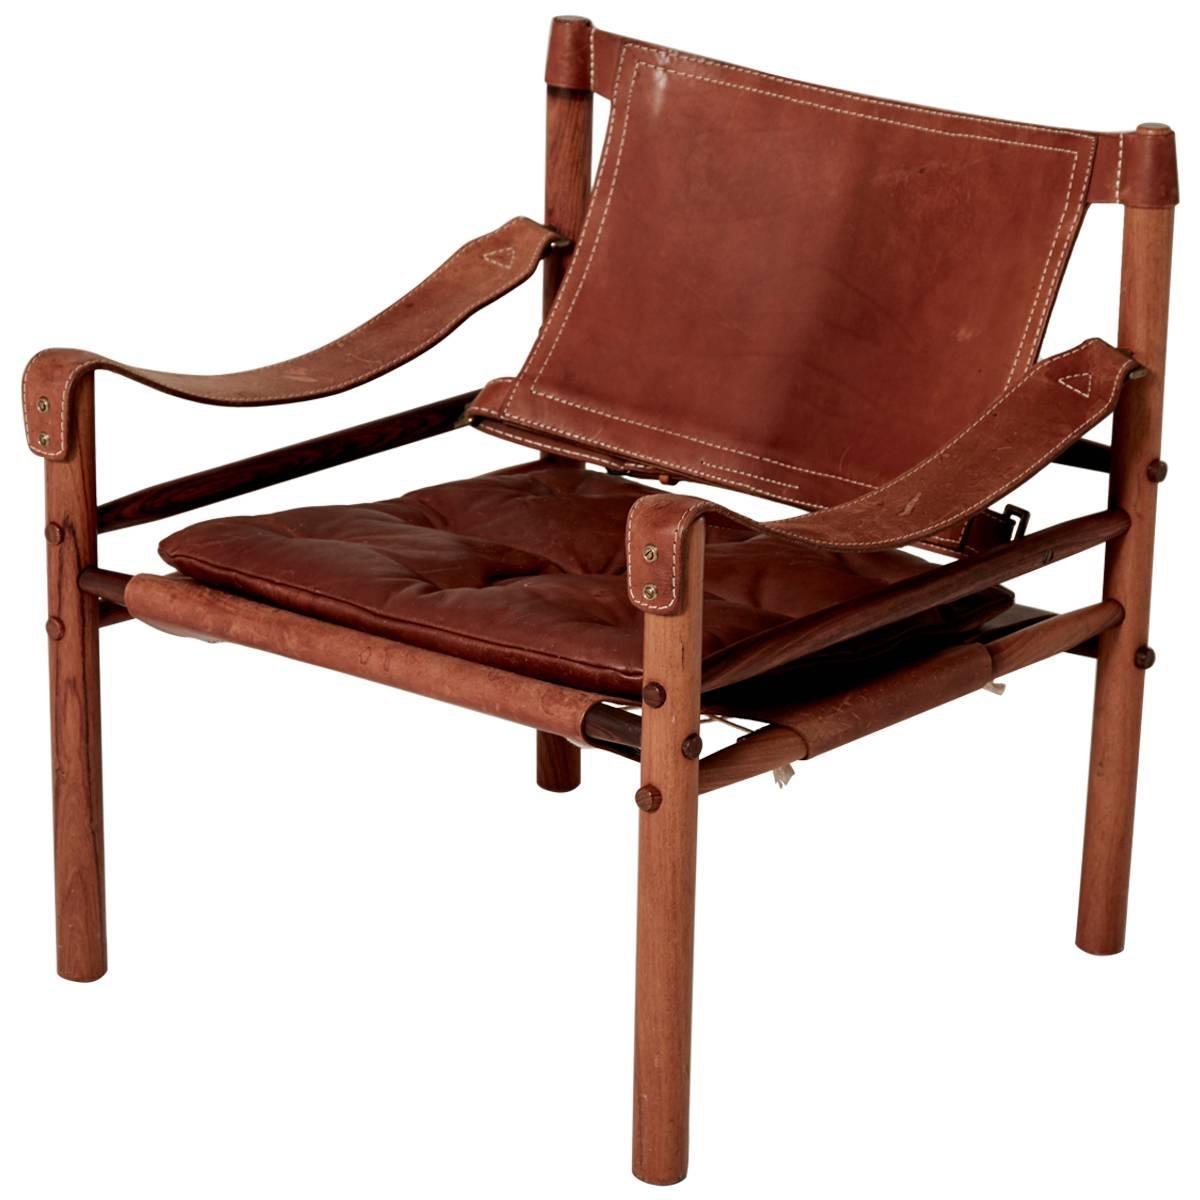 Arne Norell Safari Chair, Brown Leather and Rosewood, Sweden, 1970s